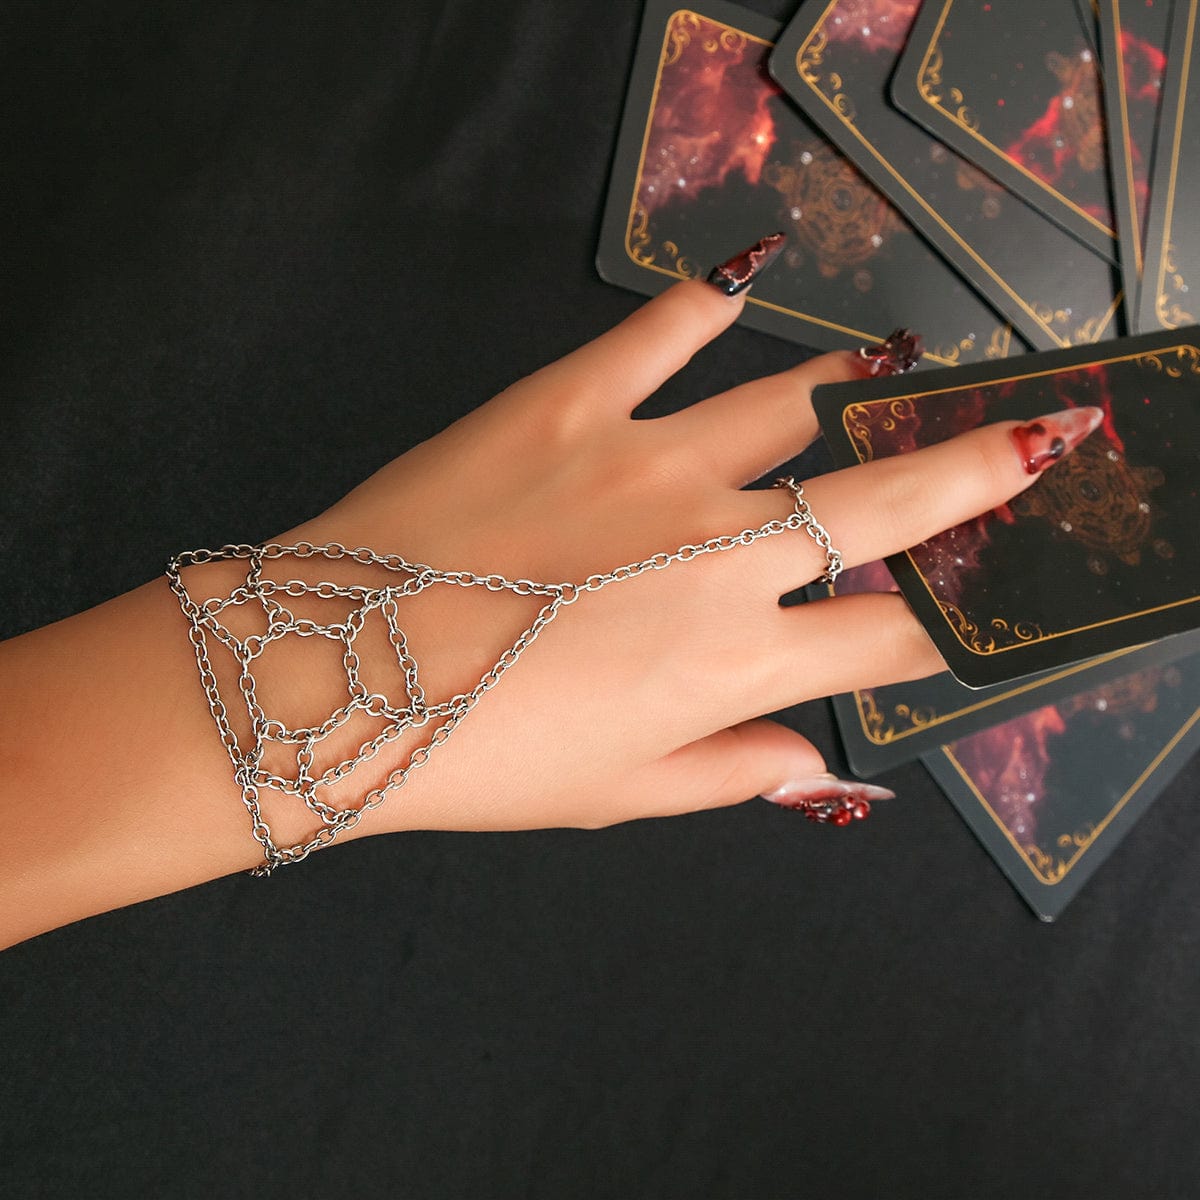 BiggShopp - Brand-new Fashioned Bracelet Ring, Hand Palm Bracelet Connected  Finger Ring, Zircon Vine Leaf Chain Bracelet with Ring 😍 at €23.34. SAVE  From 15% to 70% Shop now 👉 https://shortlink.store/LYOSIYE1Dw | Facebook